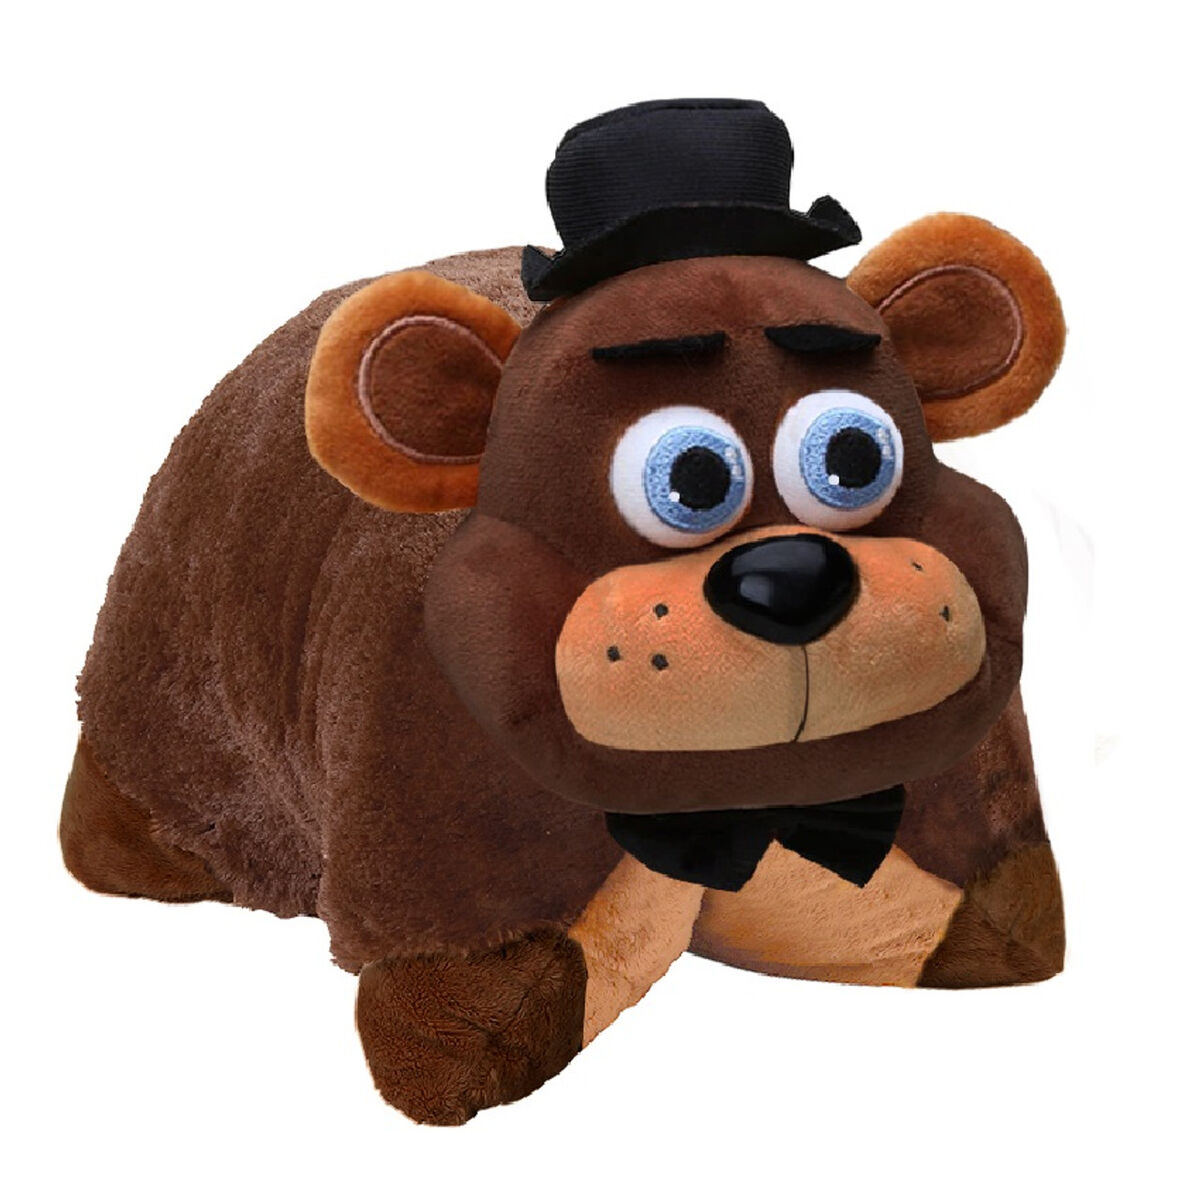 Pillow Pet, Five Nights at Freddy's Wiki